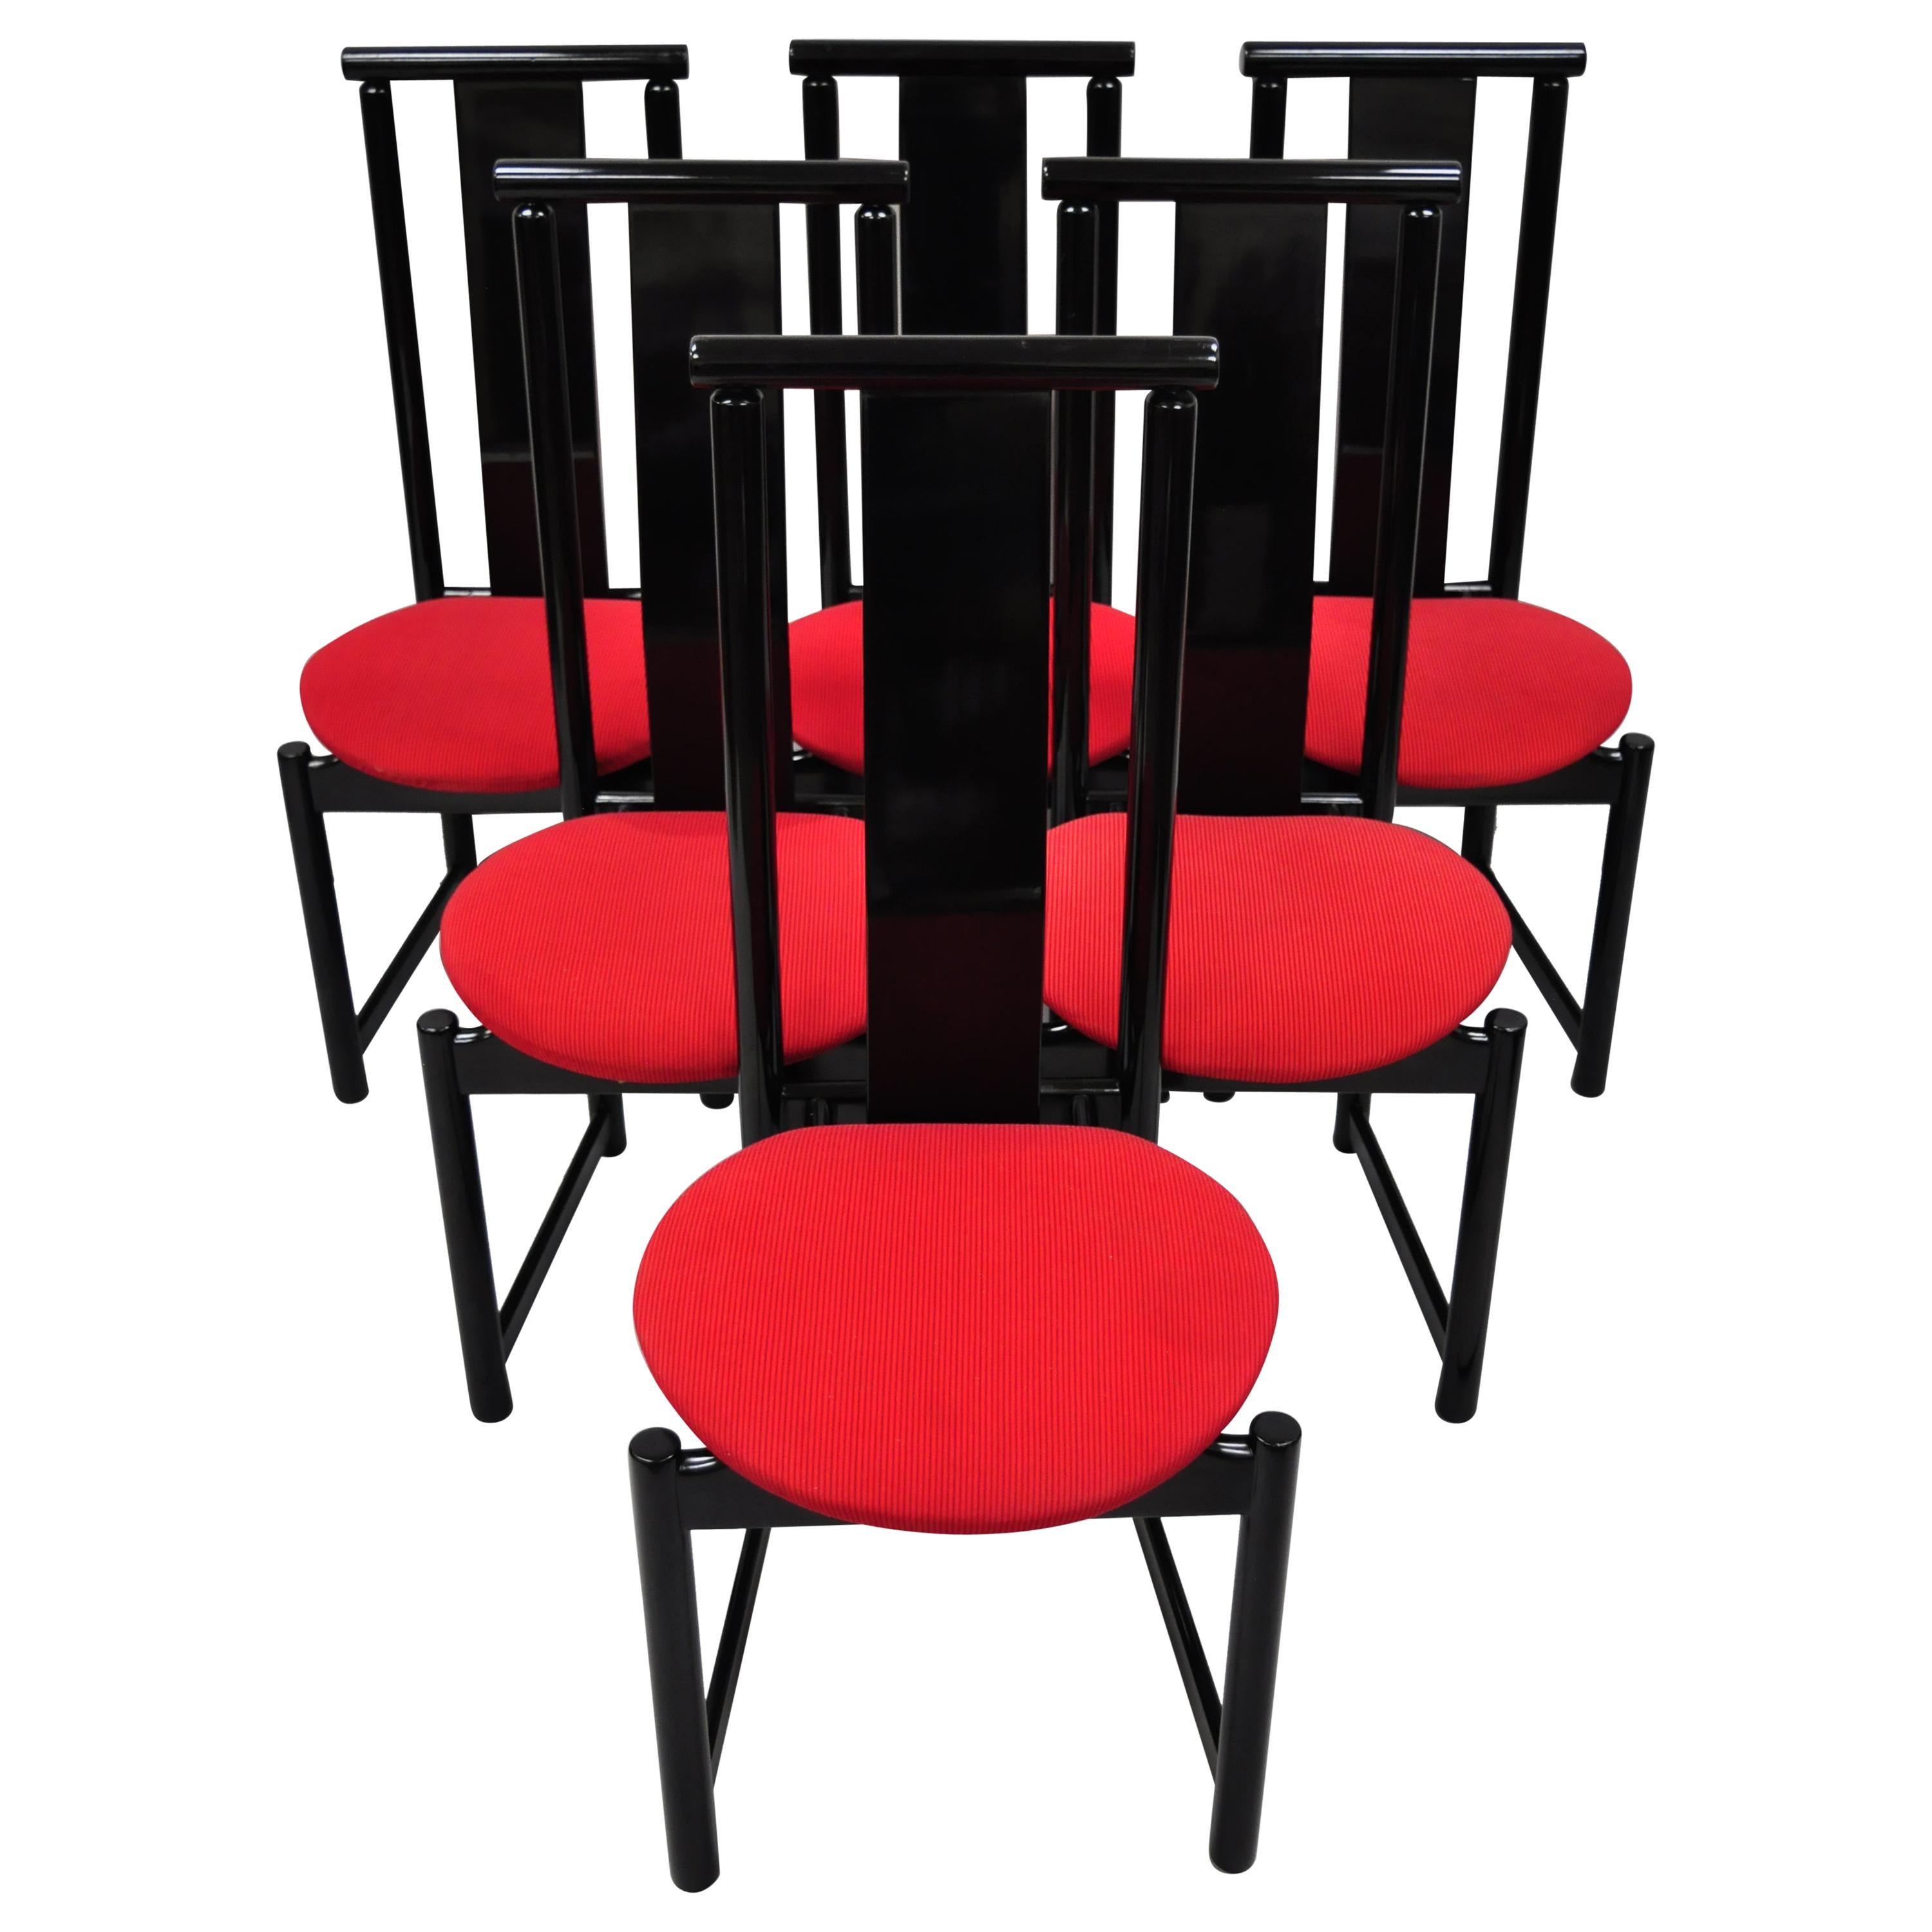 Set of 6 Black Lacquer Post Modern Memphis Style Dining Chairs Red Seat